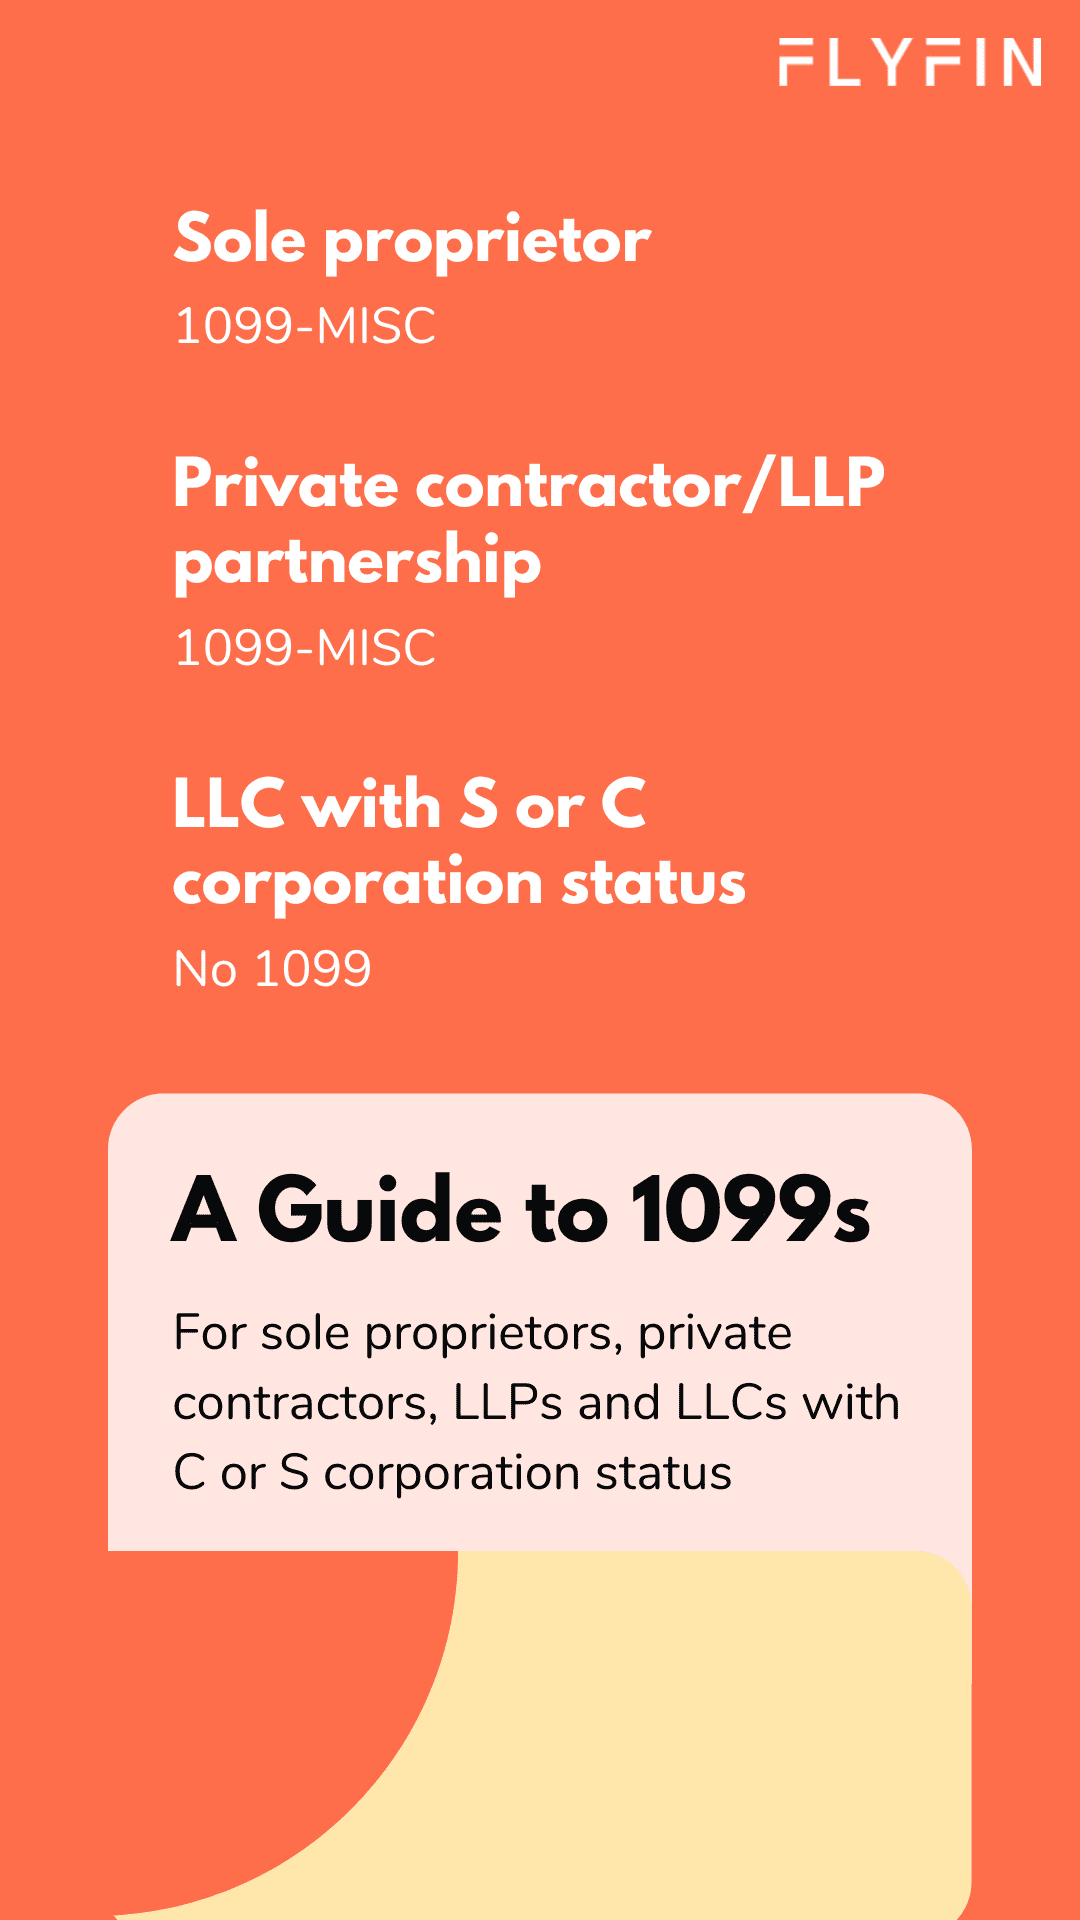 Alt text: A guide to 1099s for self-employed individuals, freelancers, and businesses with various statuses such as sole proprietor, partnership, LLC, and corporation. Covers taxes and 1099-MISC forms.